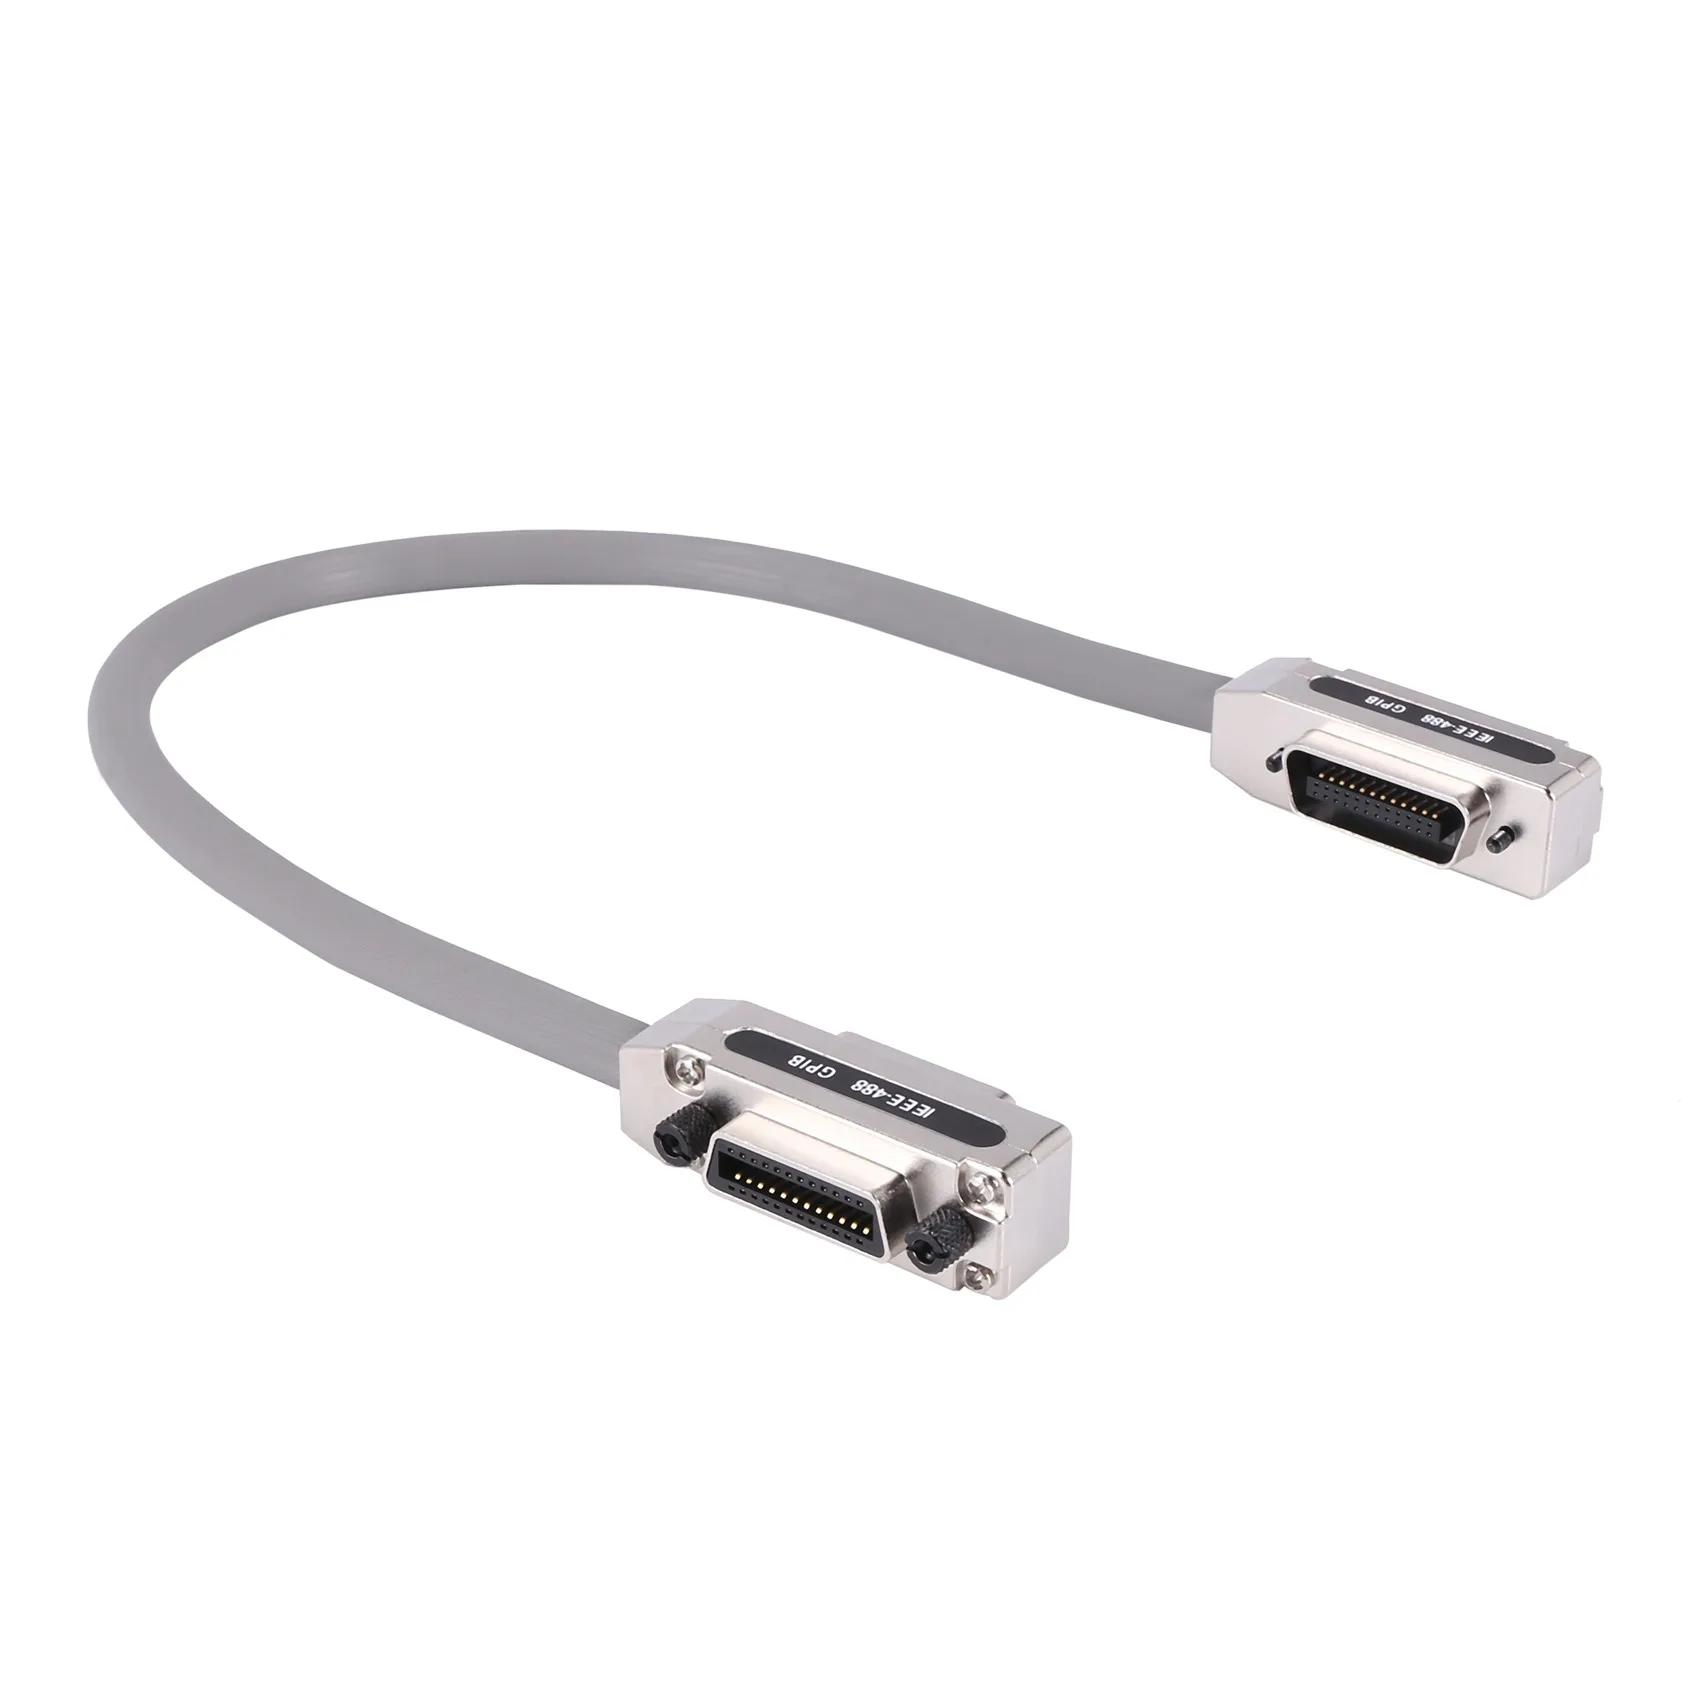 

0.5M IE488 Gpib Data Cable Industrial-Grade Communication Transmission Cable Terminal Pci Industrial Control Cable